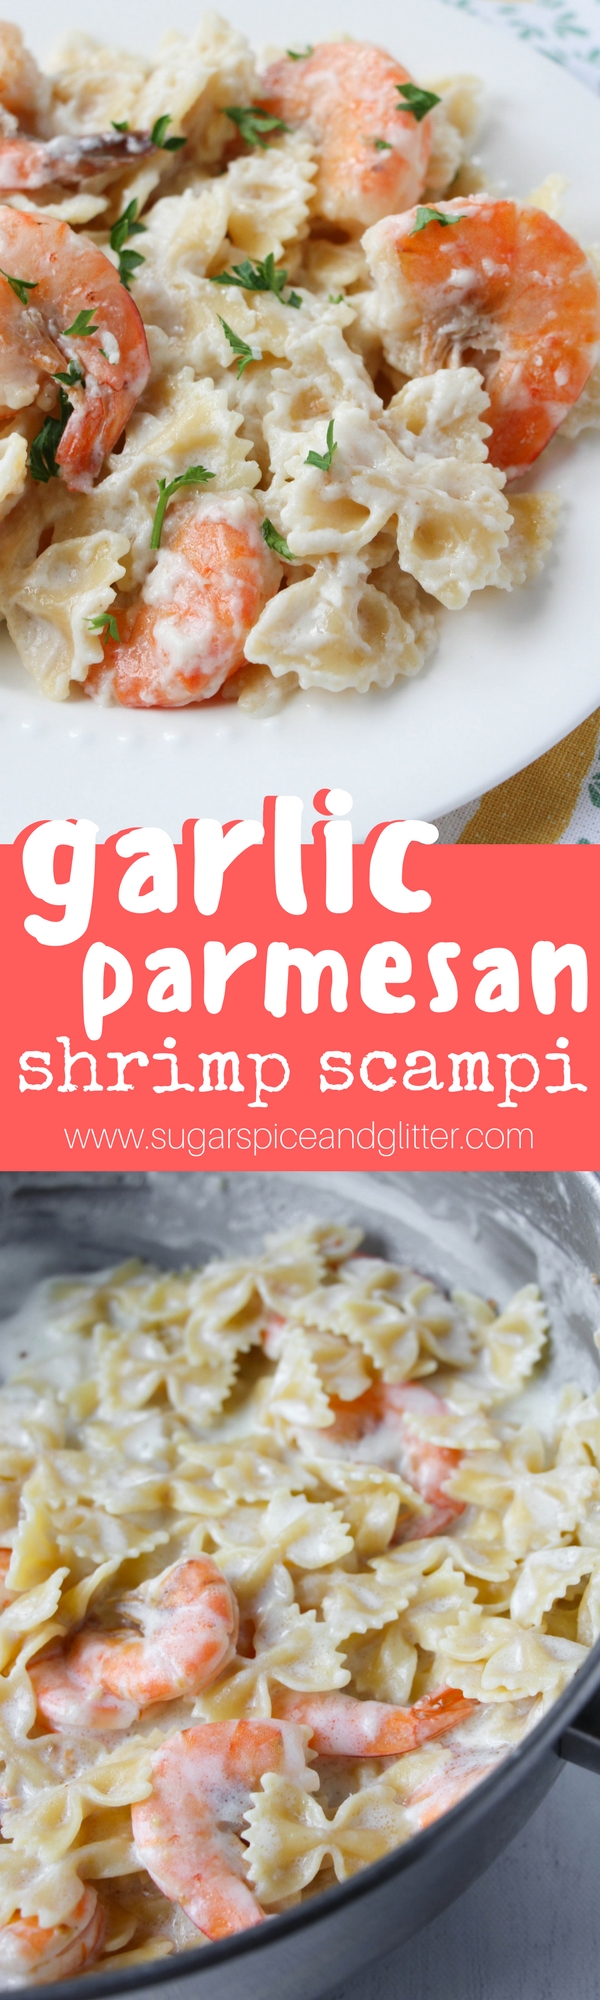 A lightened up and healthier shrimp scampi recipe made with plenty of garlic, lemon, Parmesan and milk instead of heavy cream. A delicious seafood recipe the whole family will enjoy